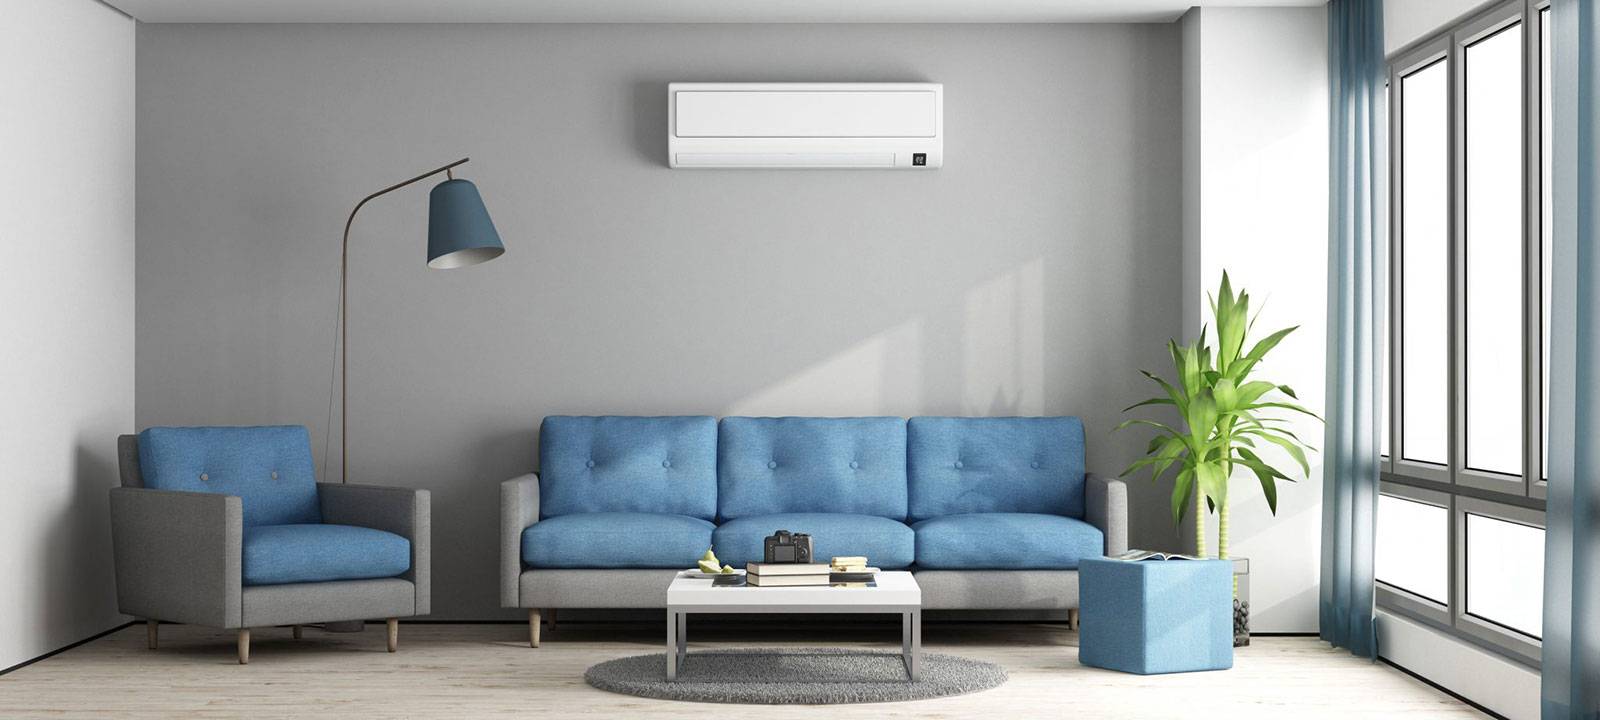 Alair Airconidtioning Installations South Africa